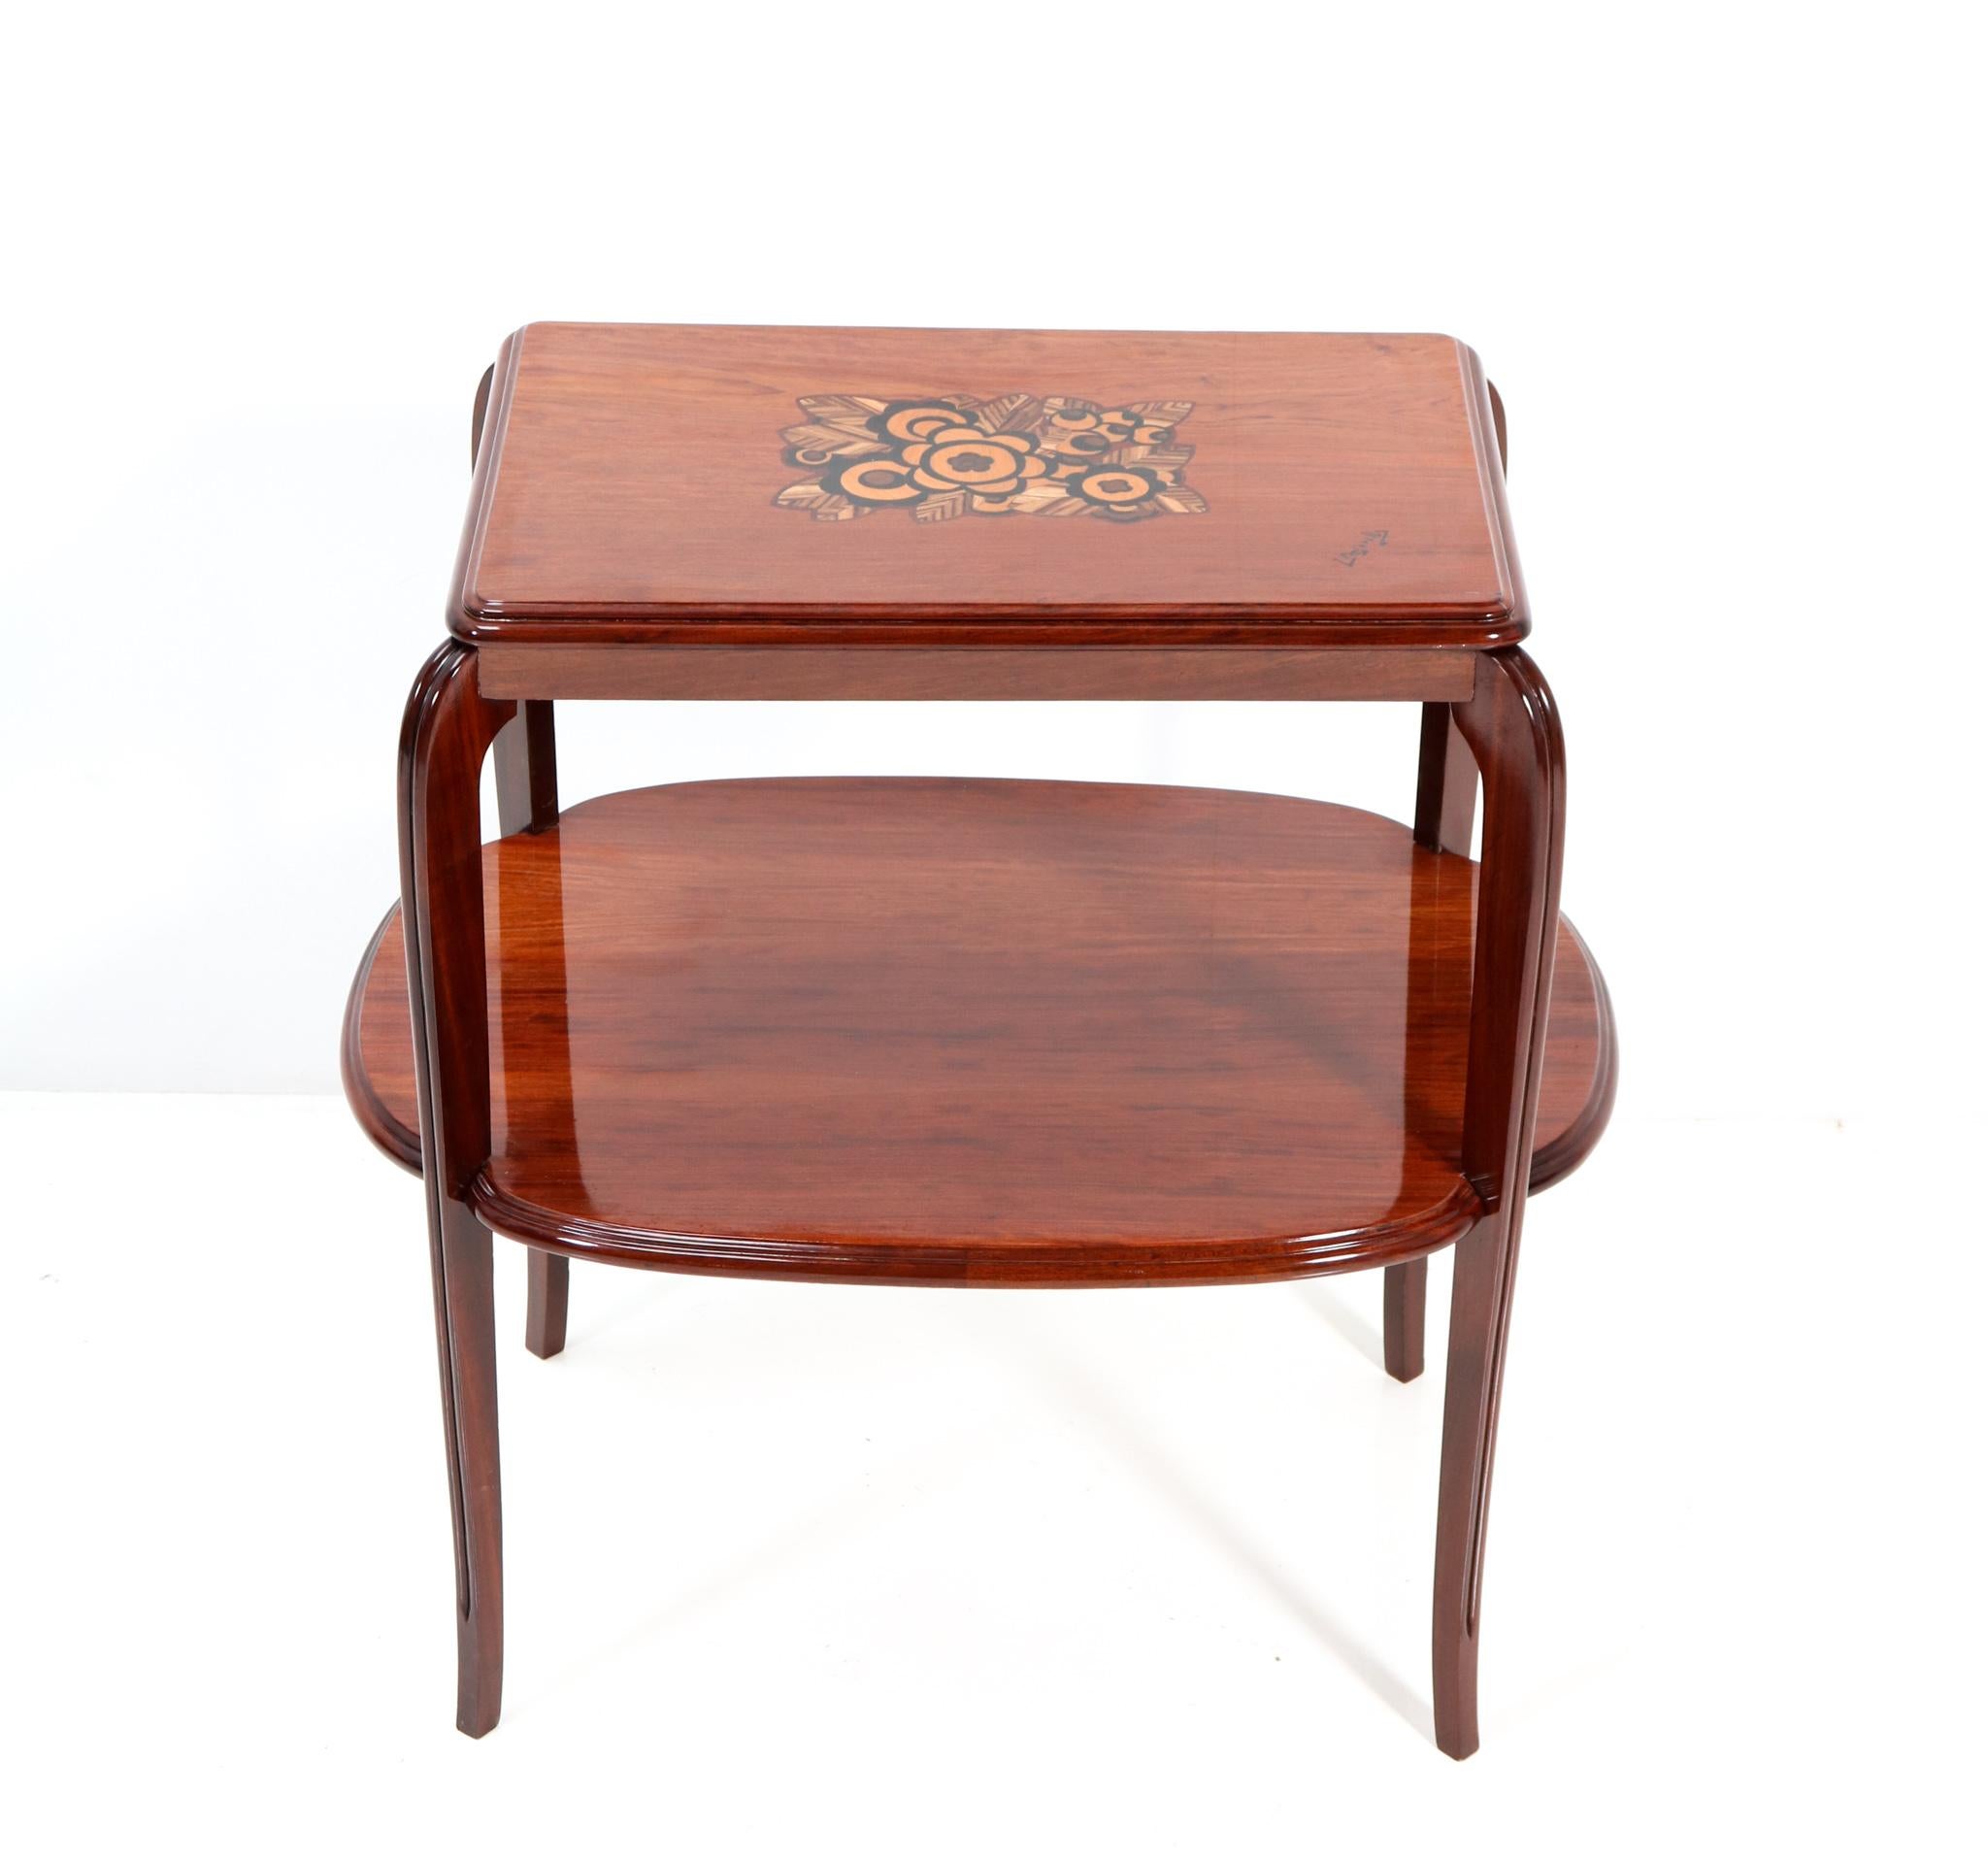 Magnificent Art Deco side table with inlay.
Design by Louis Majorelle.
Striking French design from the 1920s.
Solid walnut base with curved lined legs.
The original veneered table top is inlaid with flowers and
signature of Louis